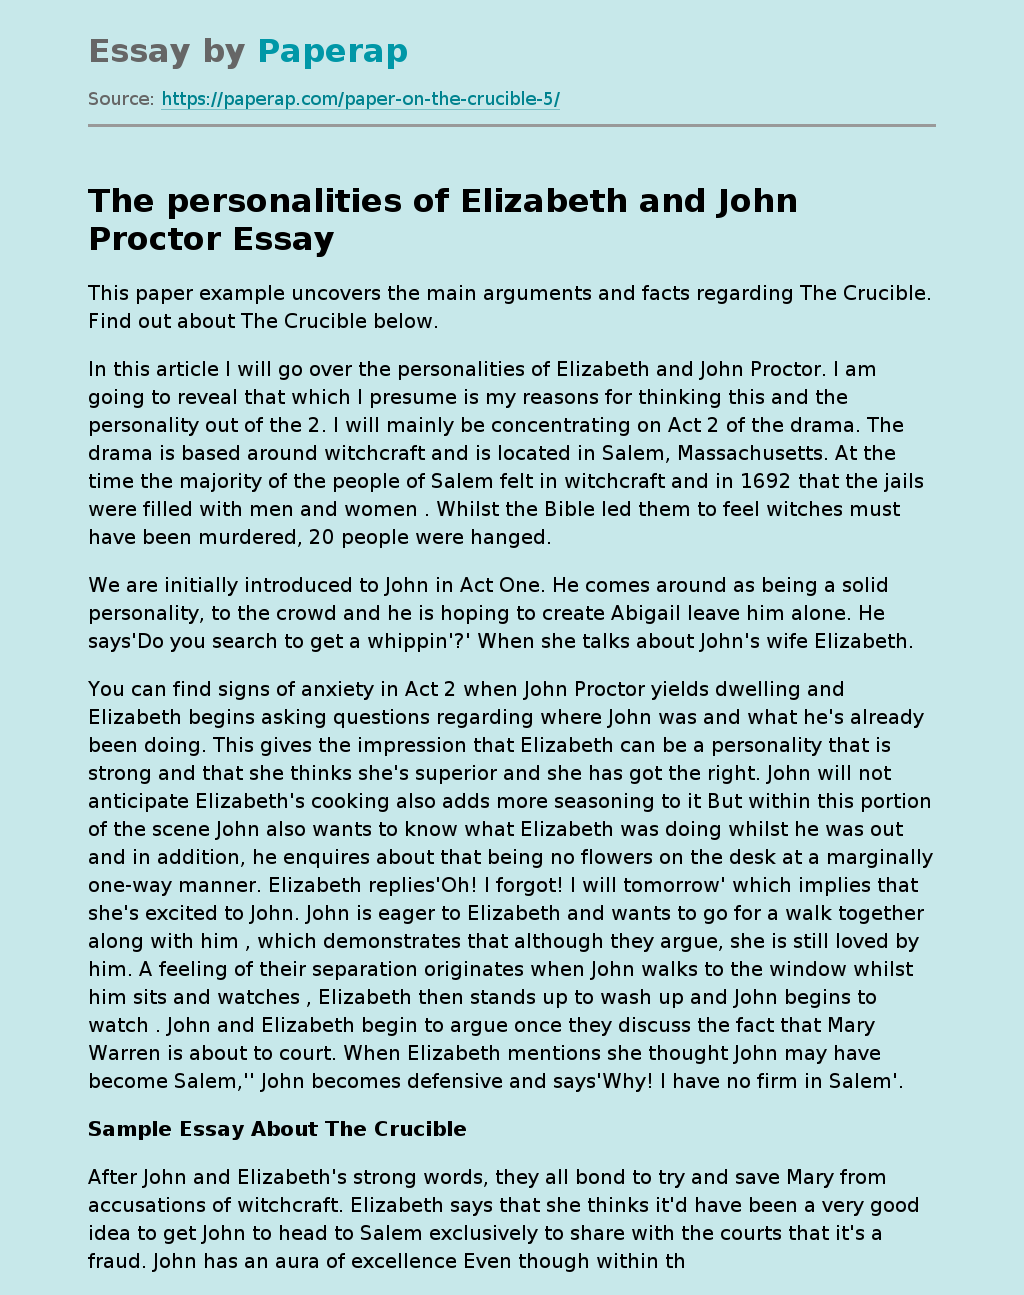 The personalities of Elizabeth and John Proctor: Salem Witch Trials